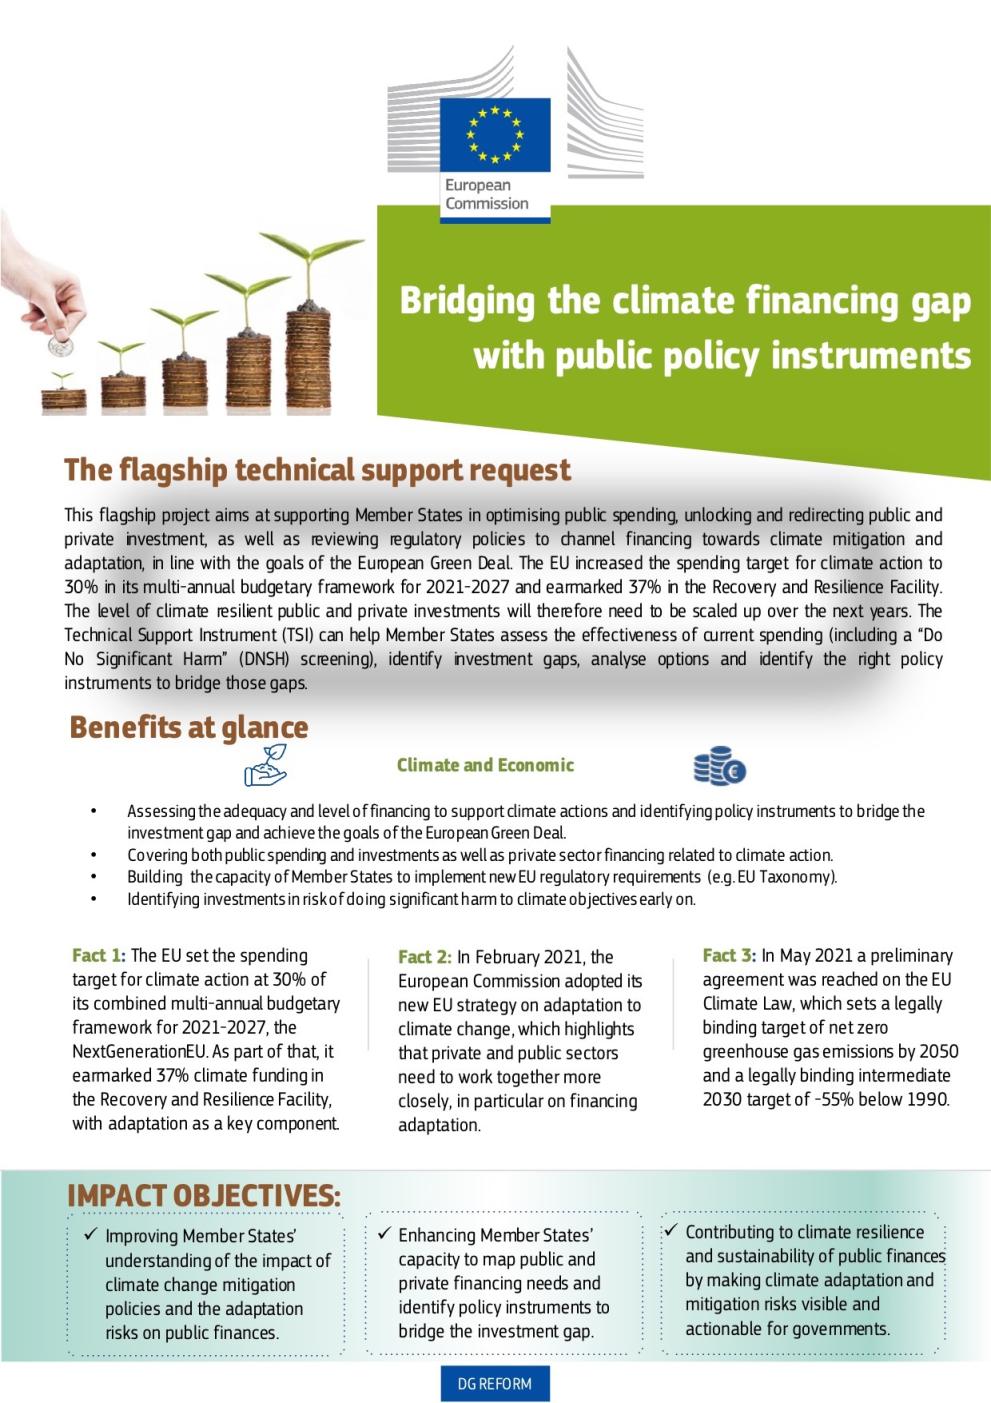 Bridging the Climate Financing Gap with Public Policy Instruments